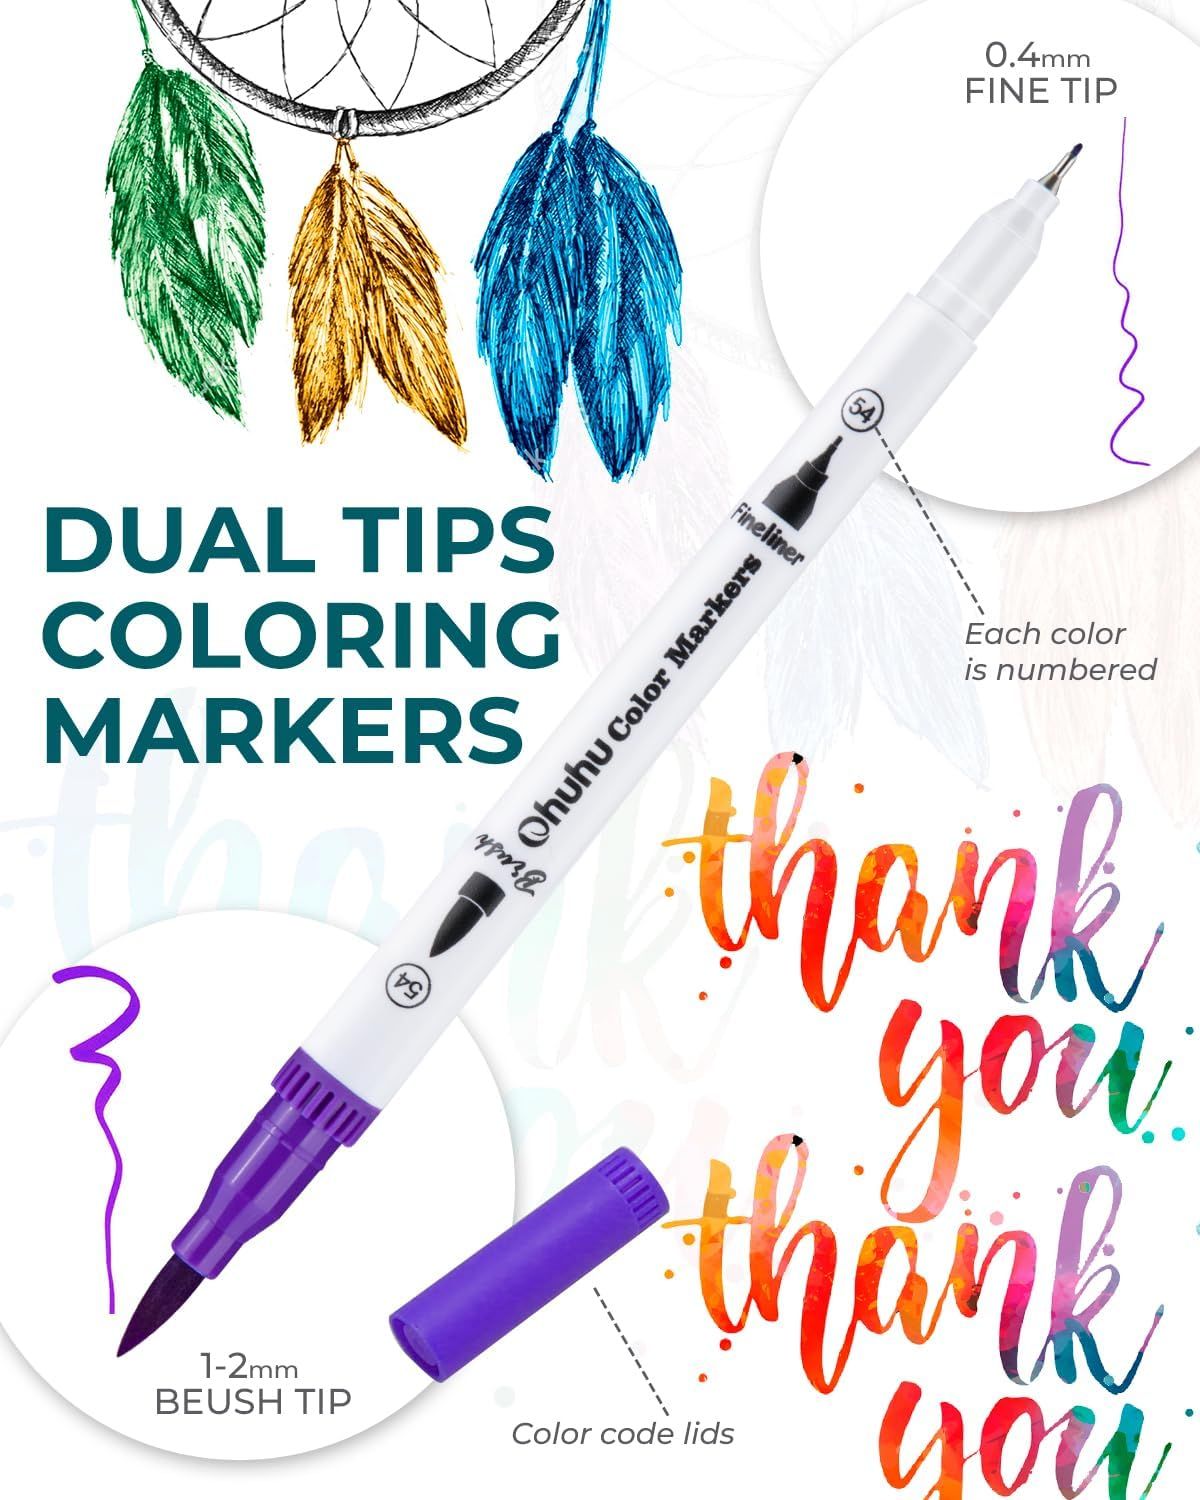 https://media.karousell.com/media/photos/products/2023/11/8/ohuhu_markers_for_adult_colori_1699410245_cd712681_progressive